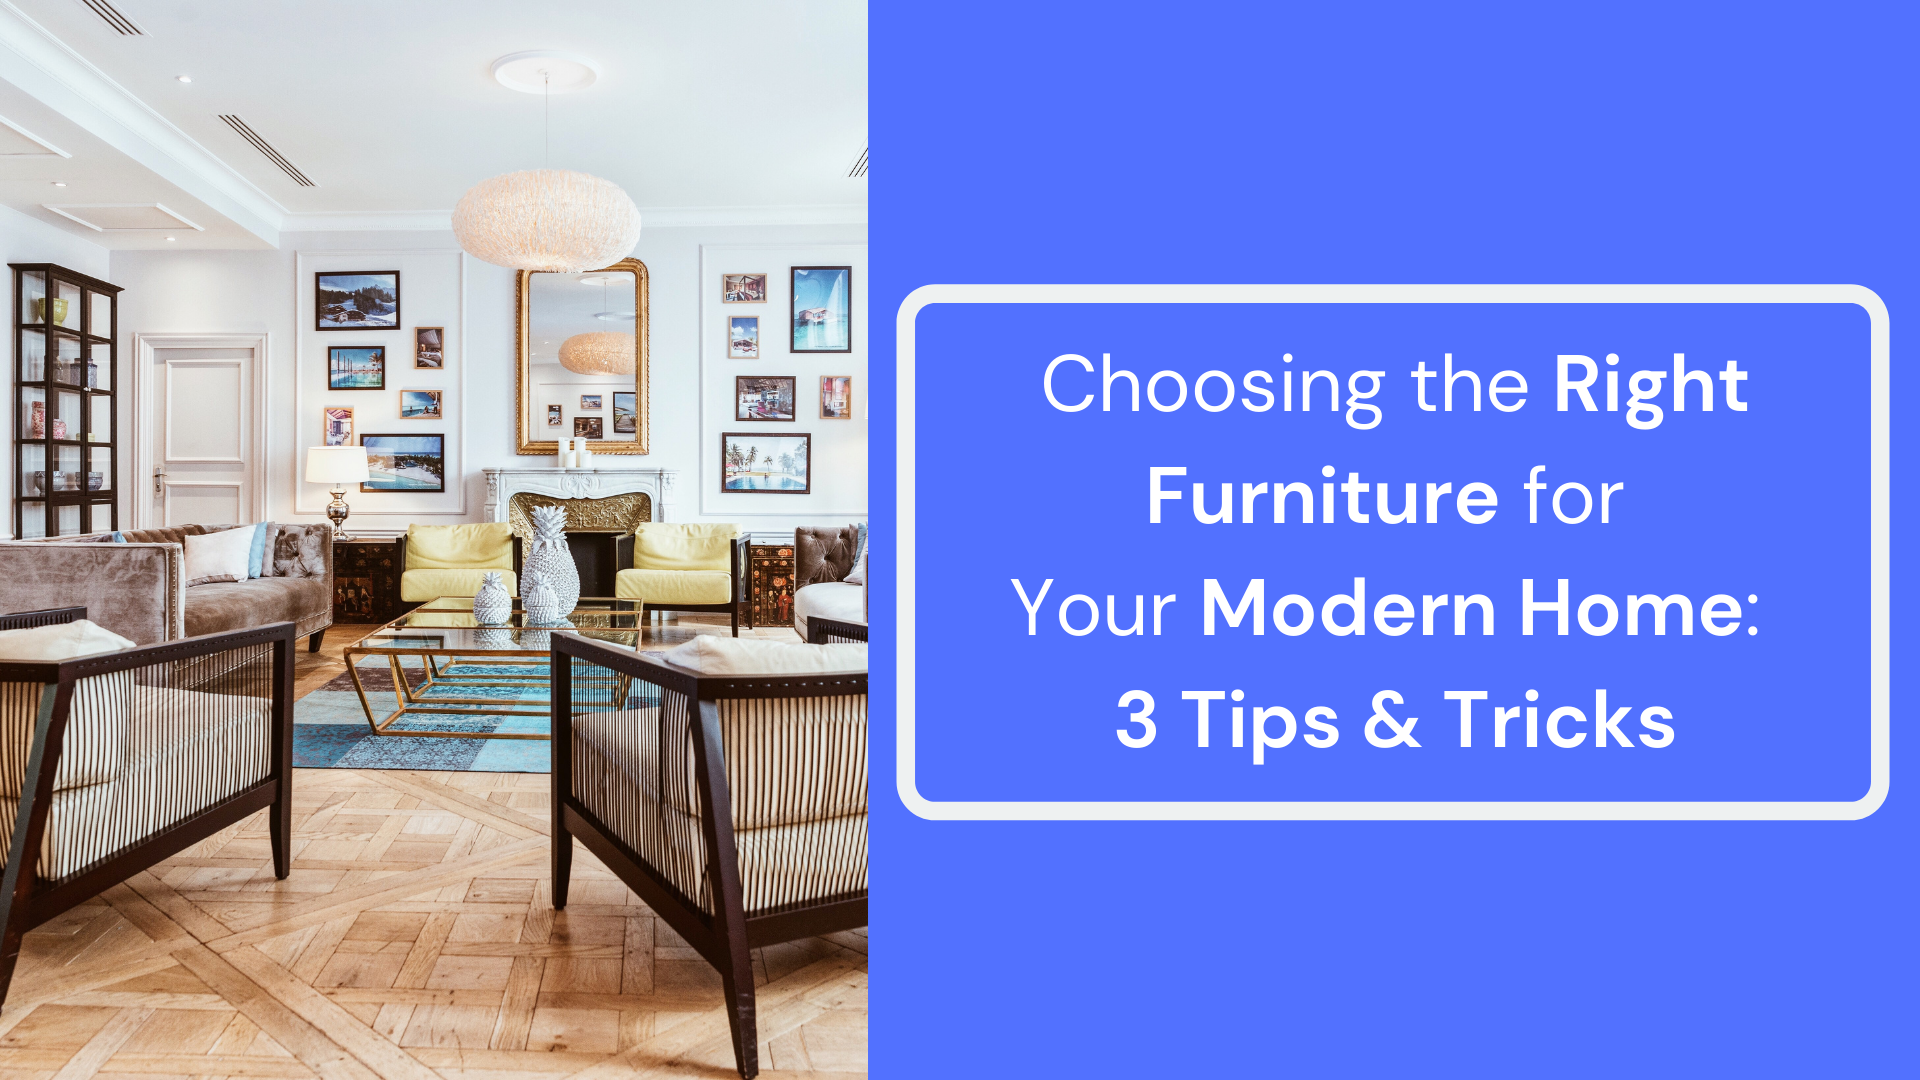 HOG 3 tips and tricks of choosing the right furniture for your modern home